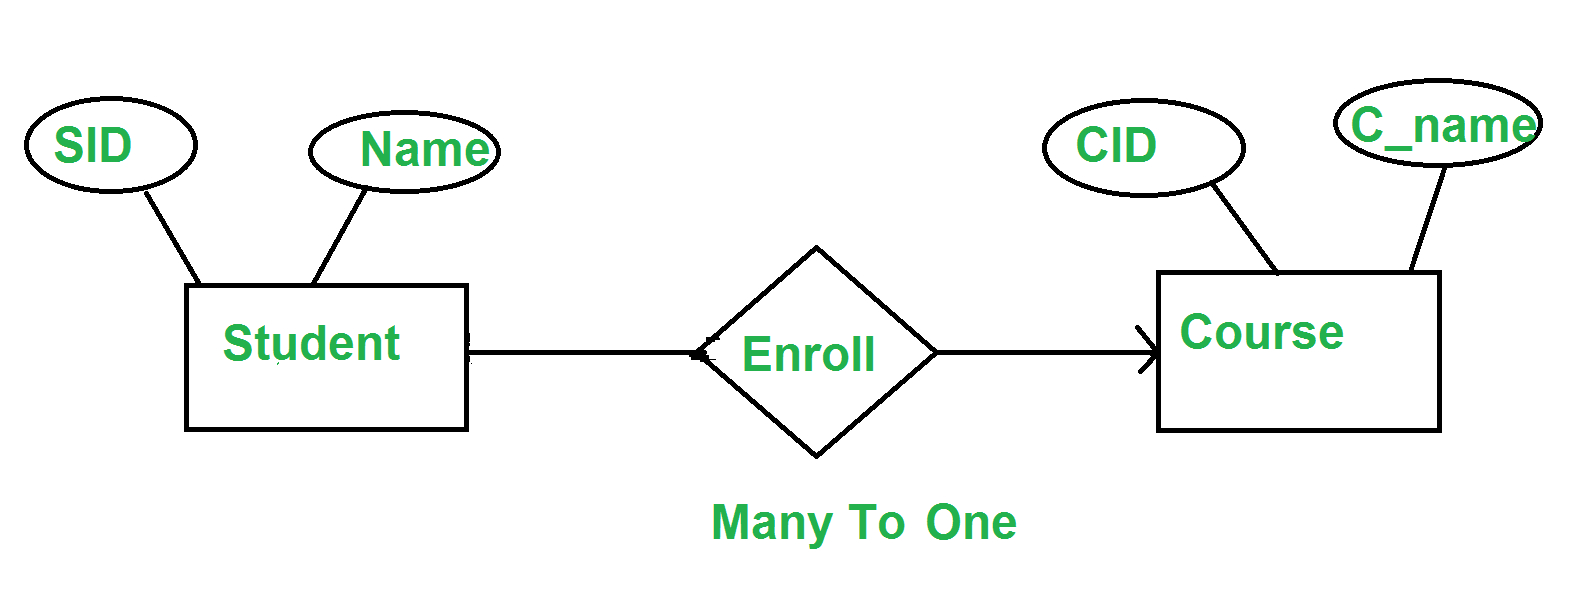 Minimization Of Er Diagrams - Geeksforgeeks intended for One To One Er Diagram